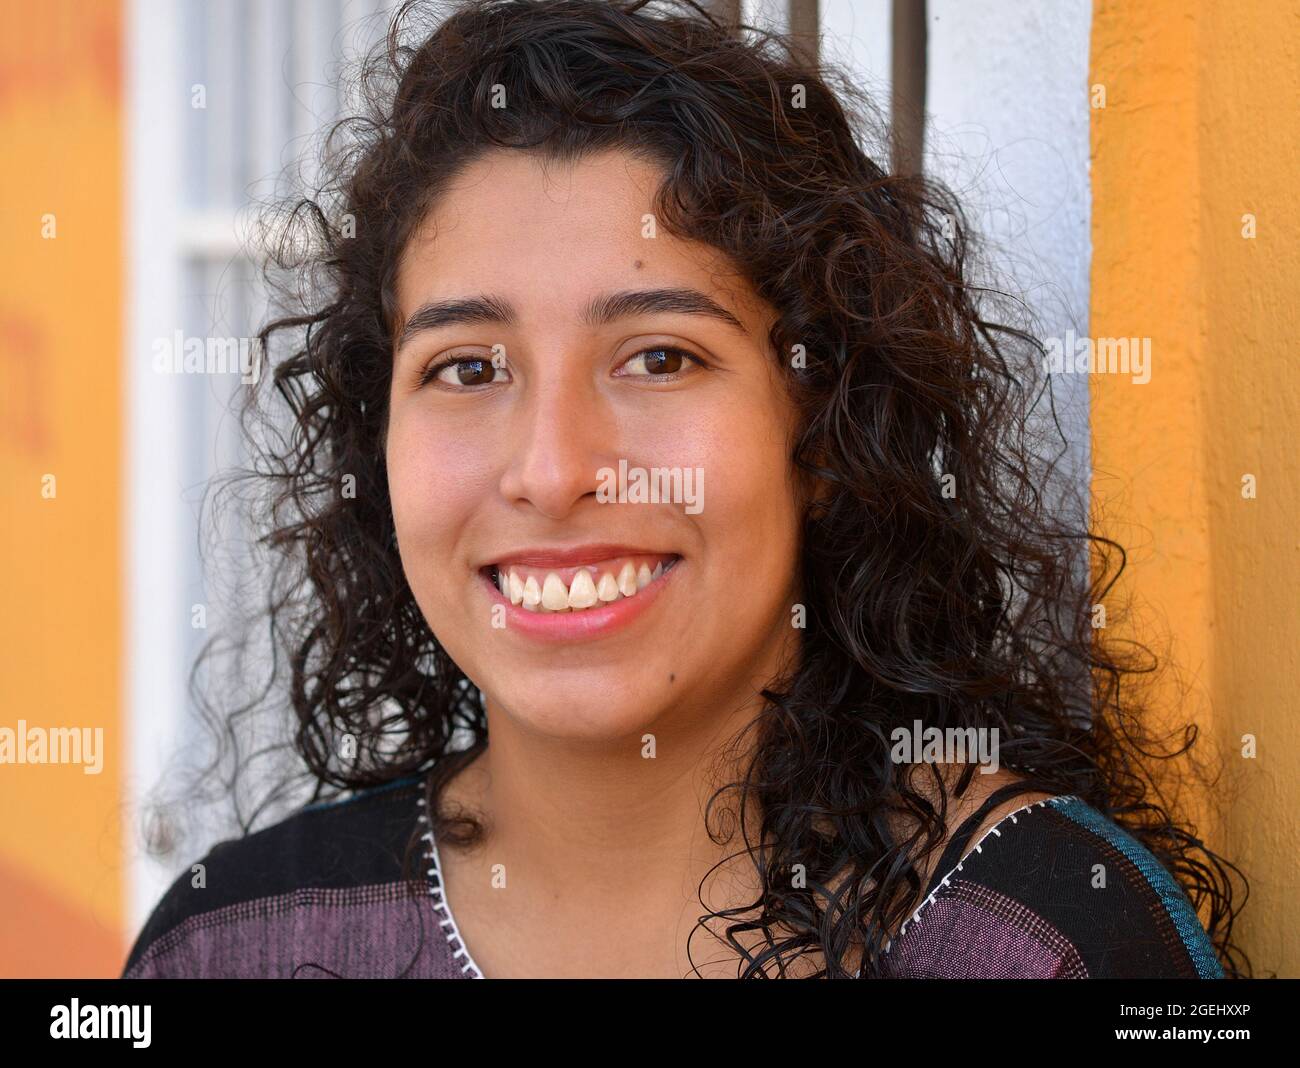 Beautiful positive emotional young Mexican Latina Hispanic woman with long black curls smiles in front of a white security entrance door. Stock Photo